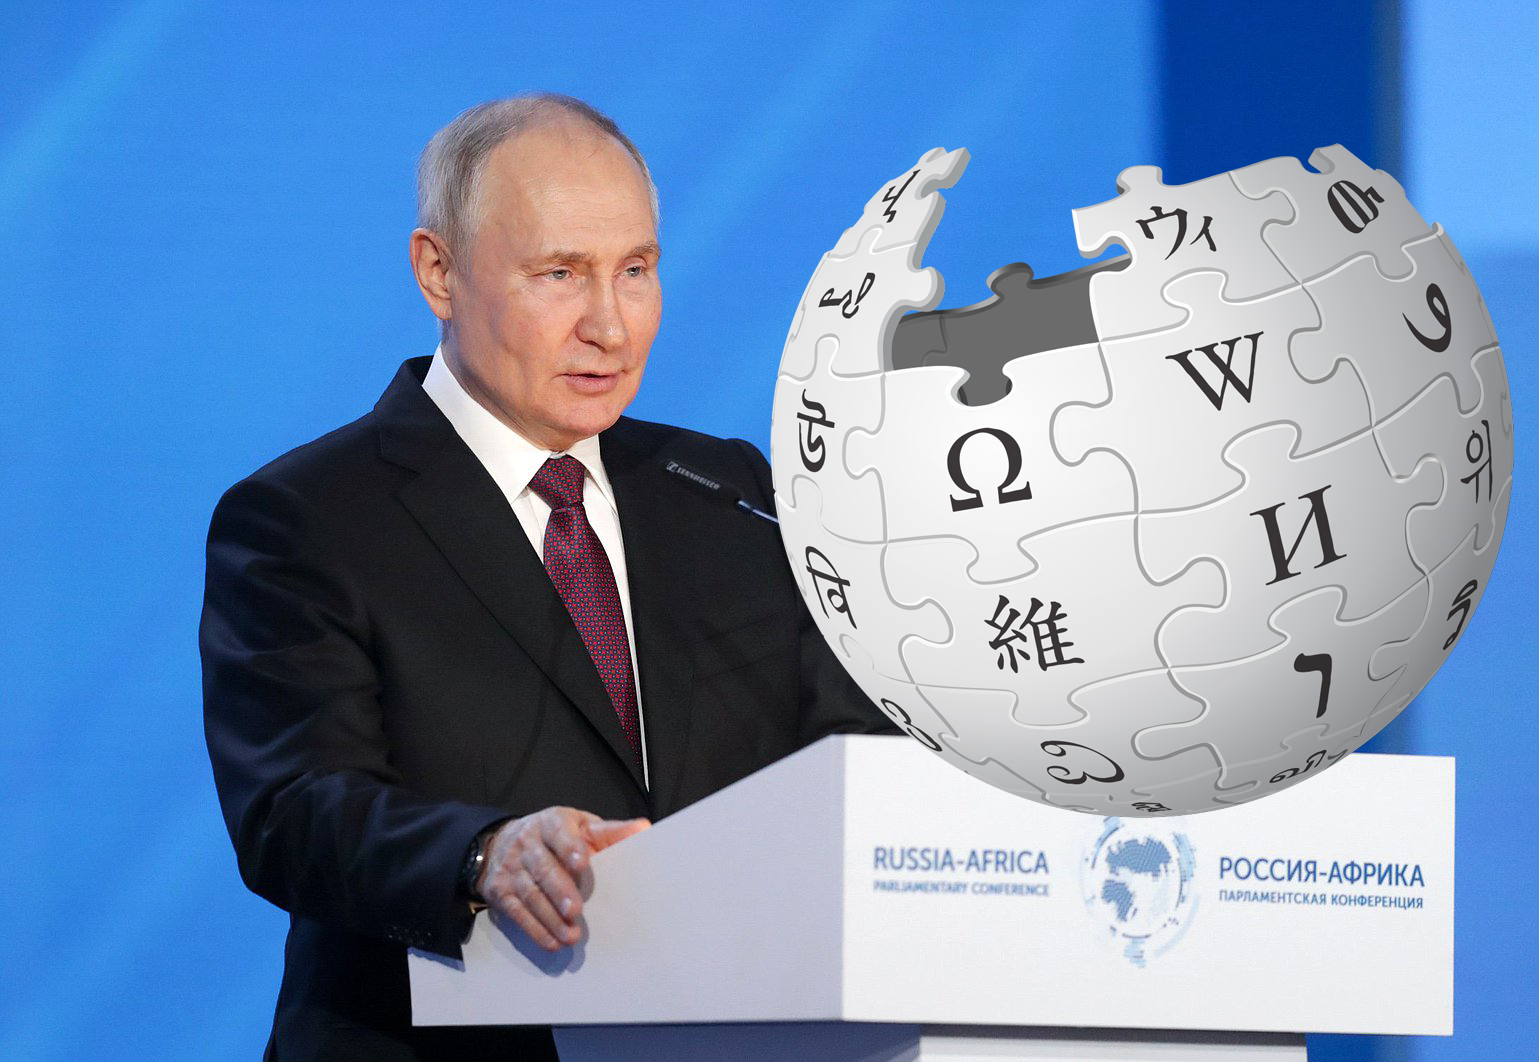 Russia has replaced Wikipedia with a state-sponsored encyclopedia that is a clone of the original Russian Wikipedia but which conveniently has been ed